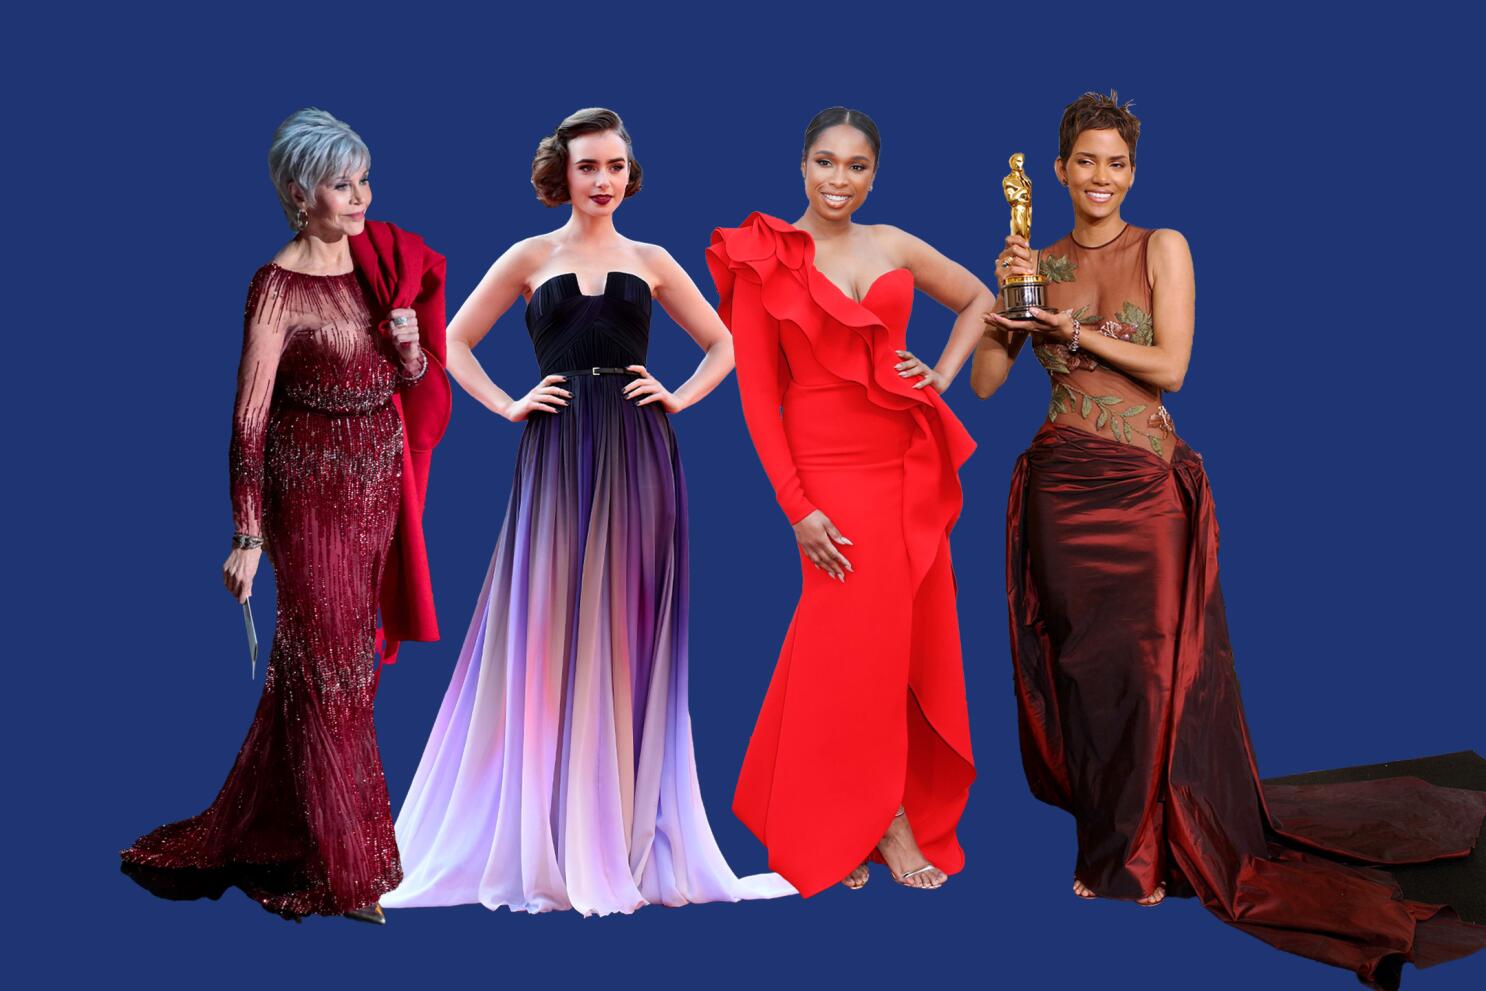 Fashion Was Back at the 2021 Oscars